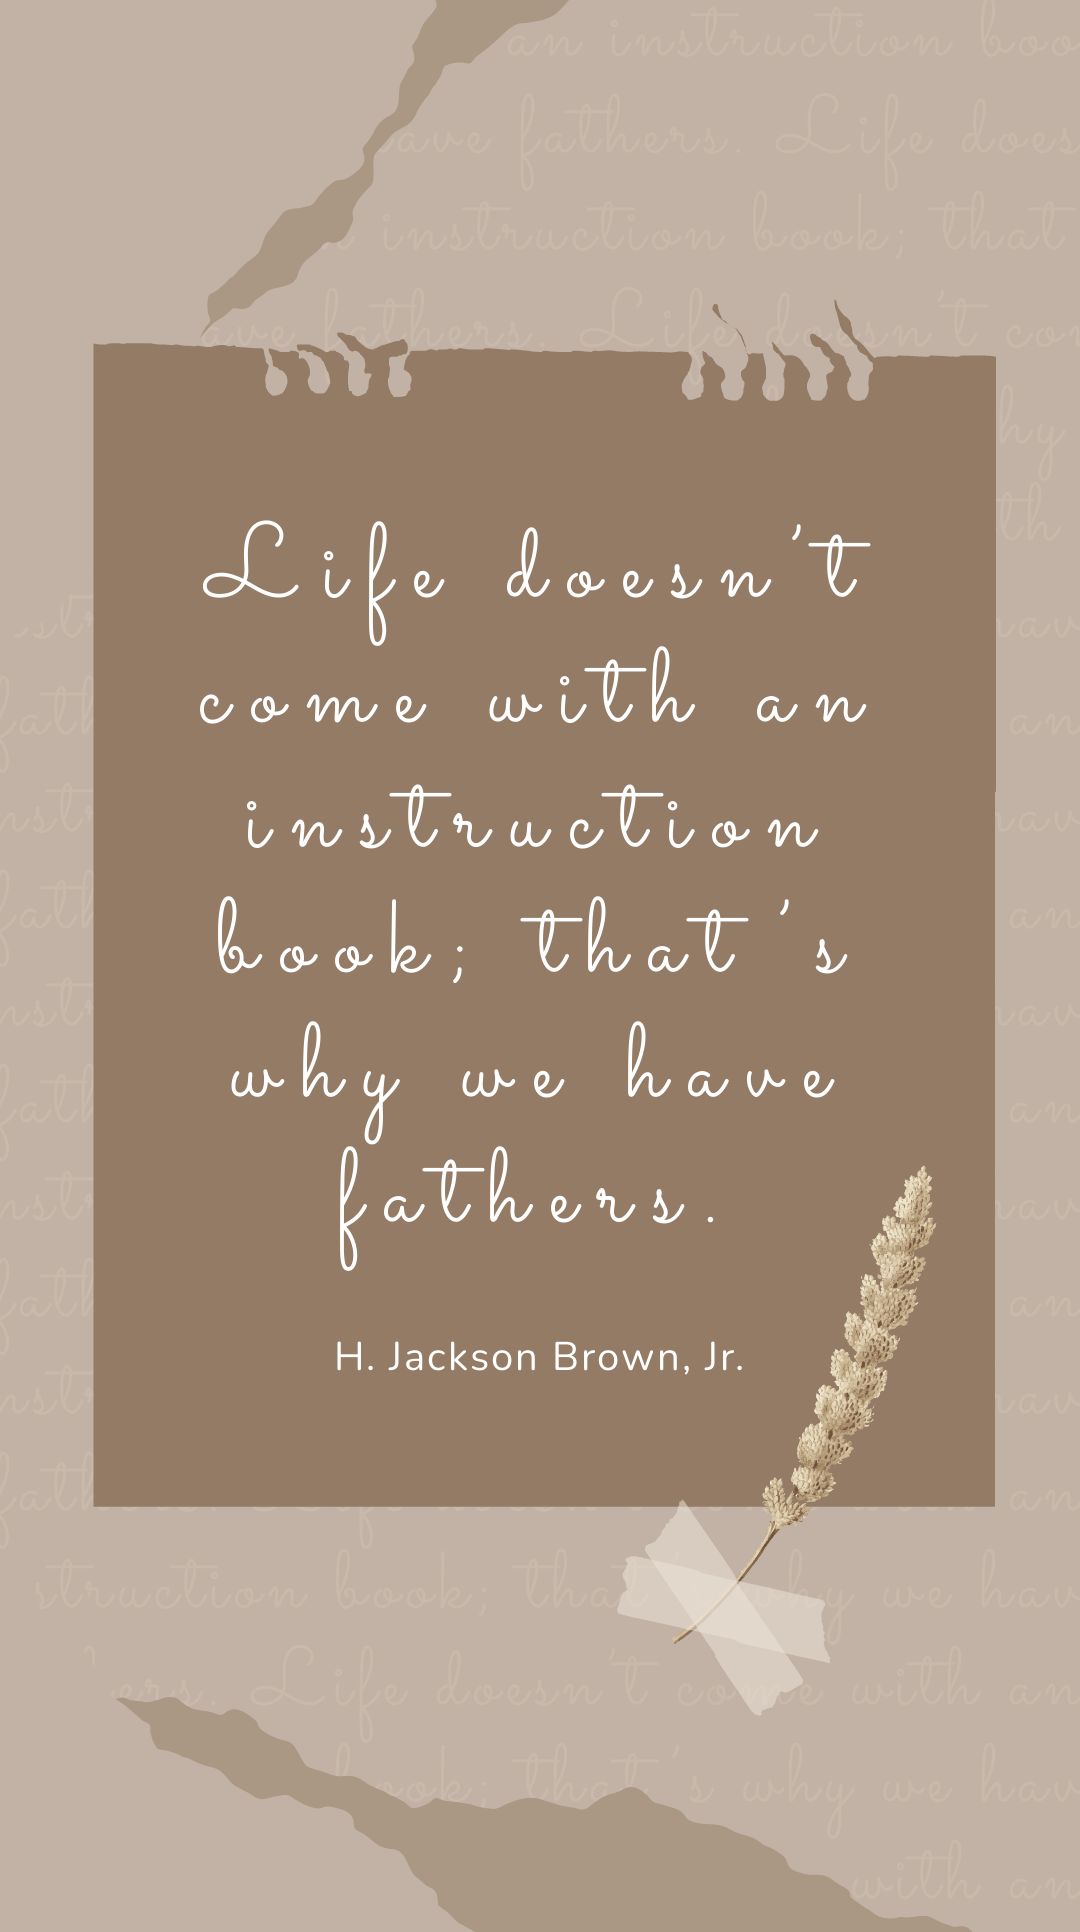 Free H. Jackson Brown, Jr. - Life doesn’t come with an instruction book; that’s why we have fathers.